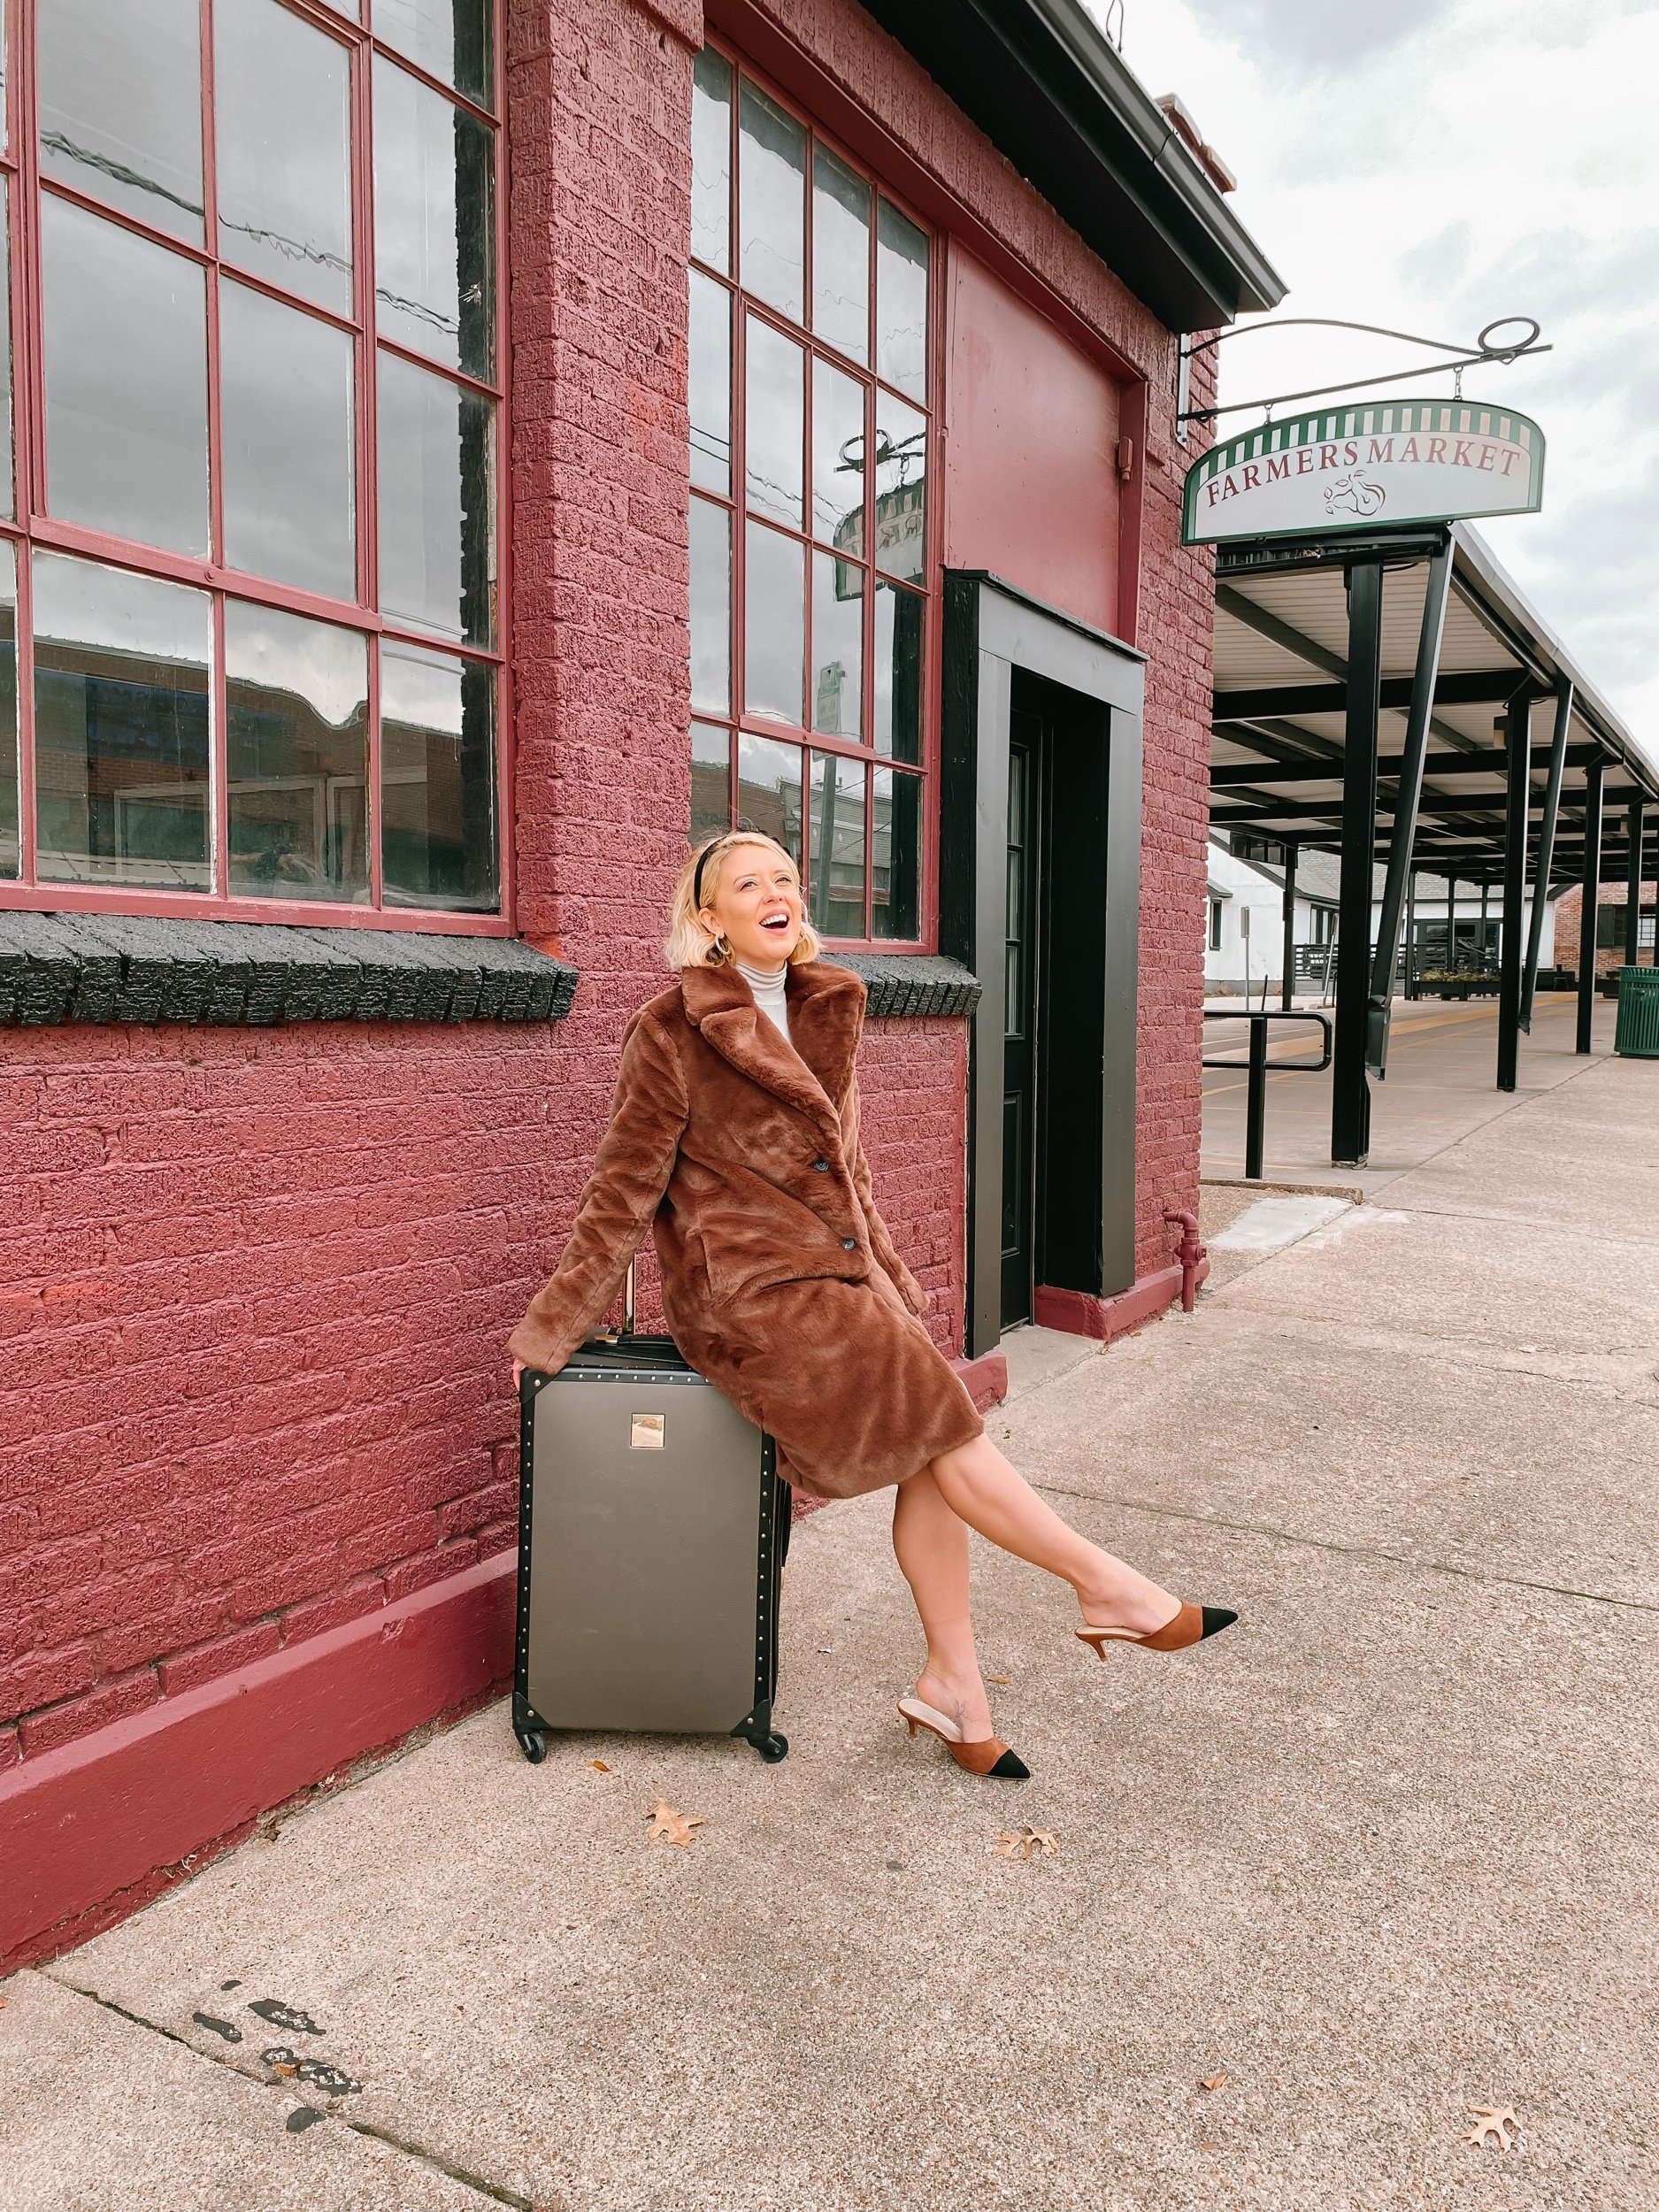 Three Heel Clicks - The Ultimate Gift Guide for the Wanderlust